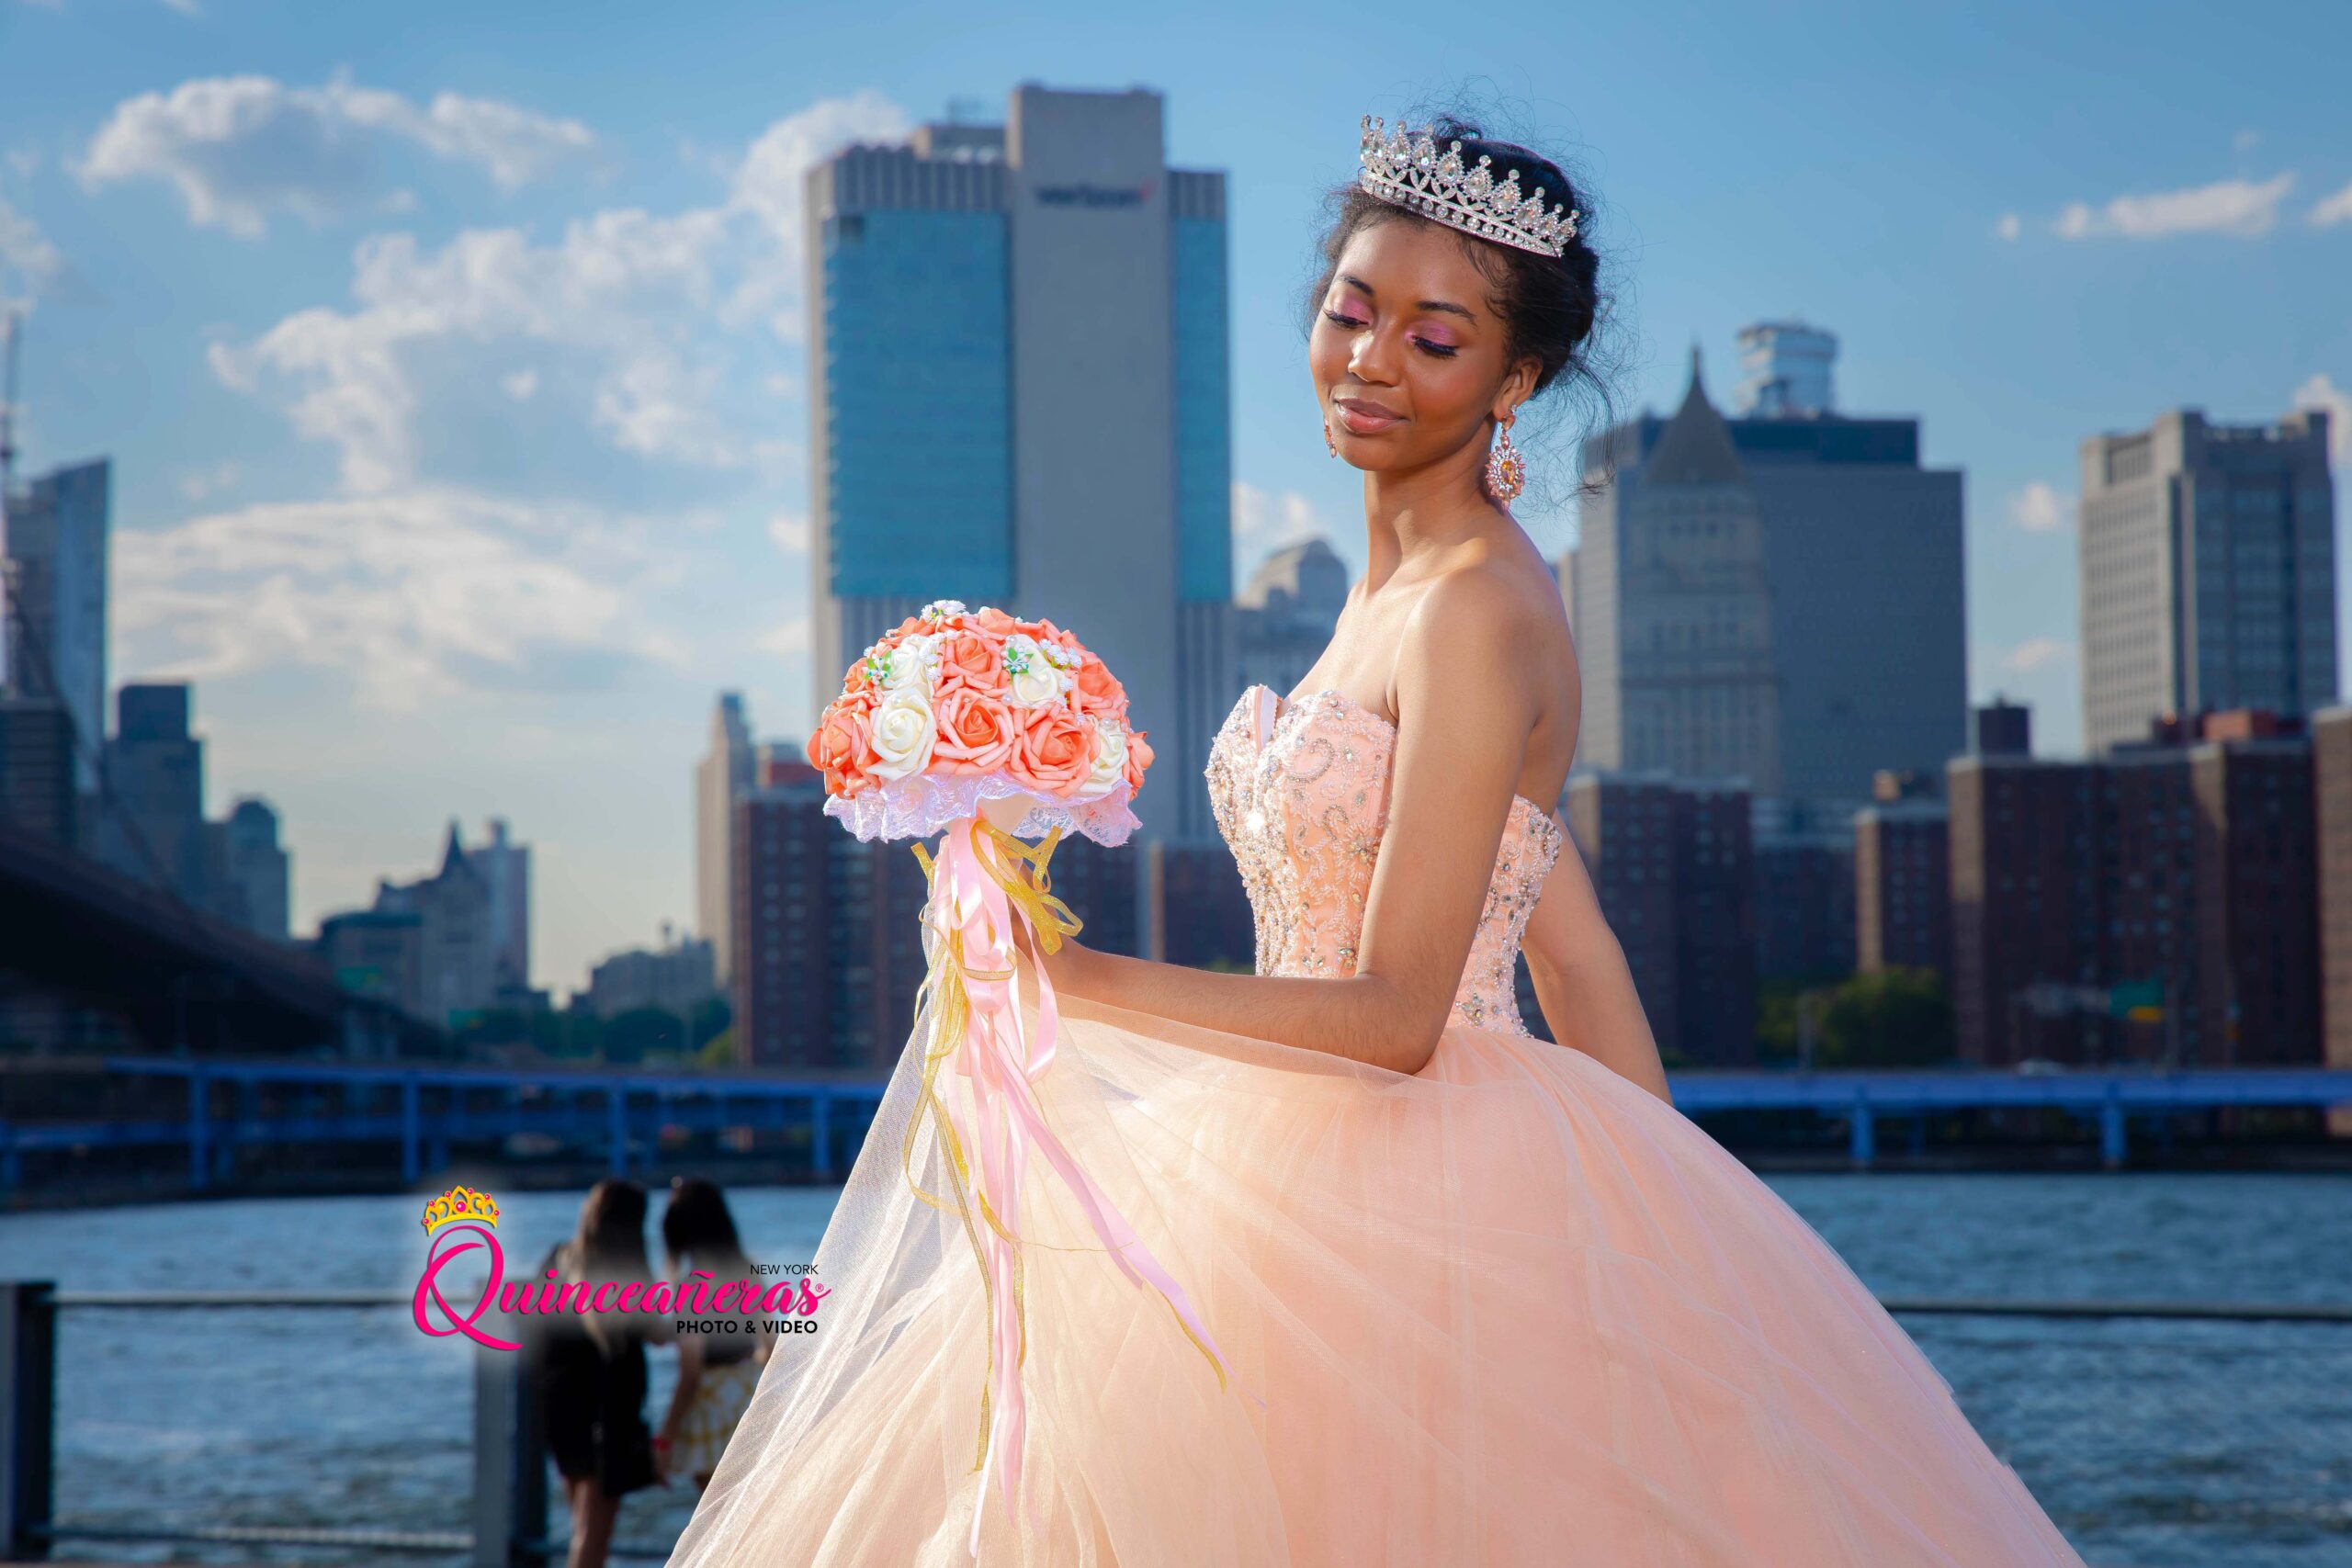 The wedding of Zaria Sweet16 photographer in Brooklyn by Quinceanerasnyc